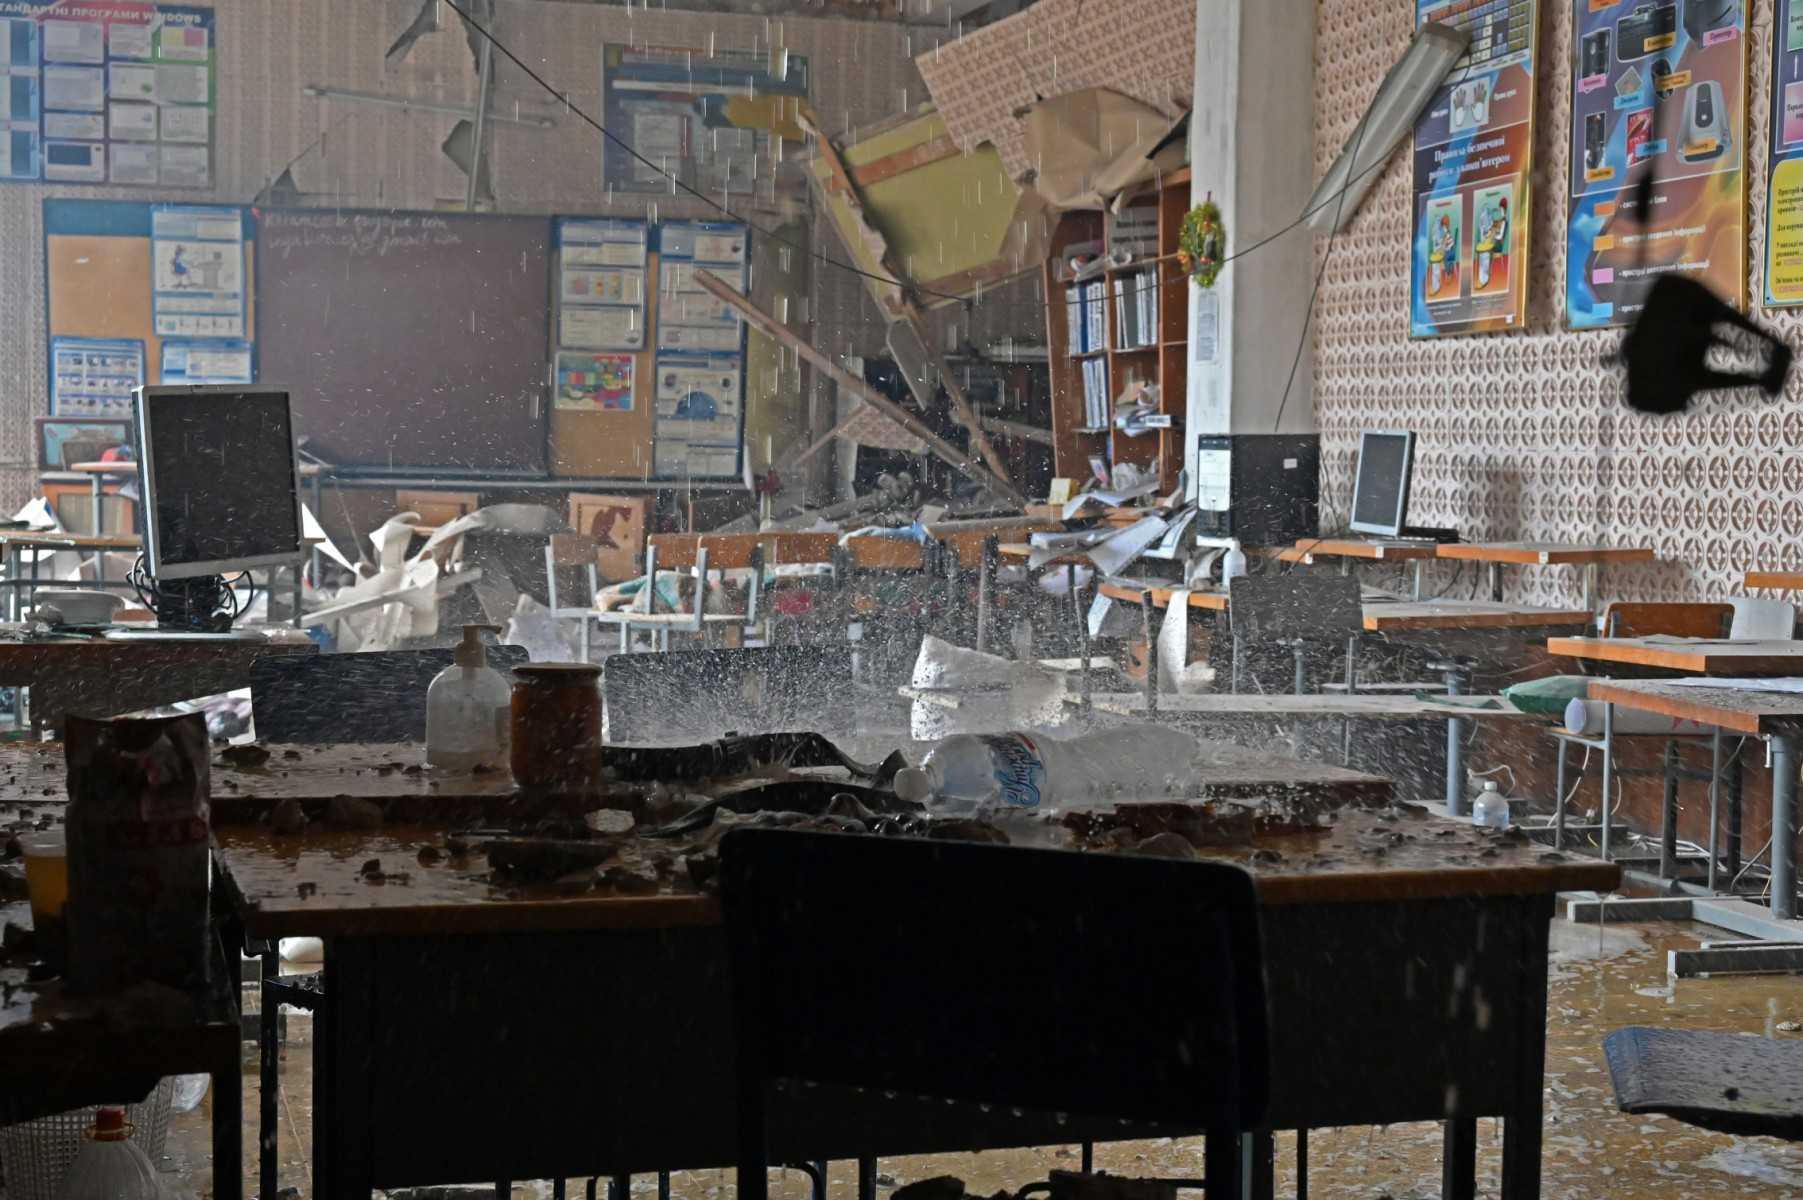 This picture taken on July 30, shows a damaged class room in a vocational school after a missile strike in Ukrainian city of Kharkiv, on July 30, amid the Russian invasion of Ukraine. Photo: AFP 